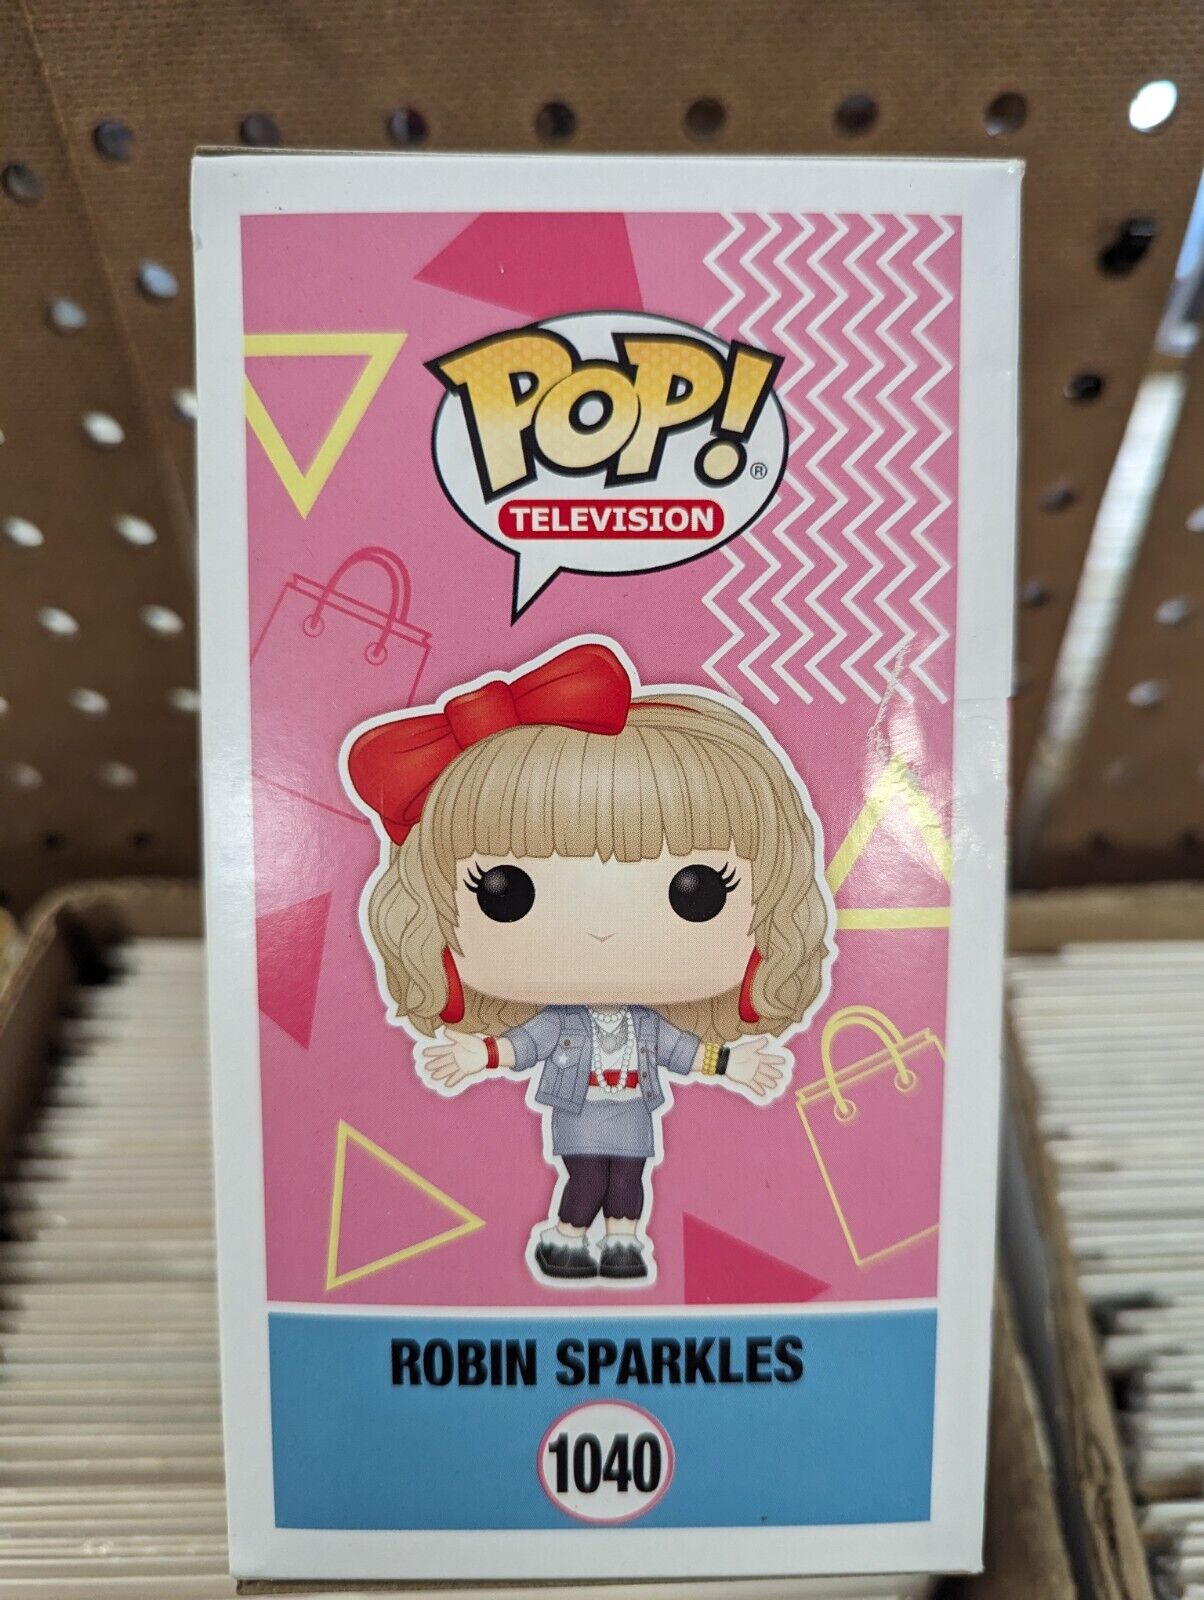 Funko Pop Robin Sparkles 1040 How I Met Your Mother 2020 Fall Convention